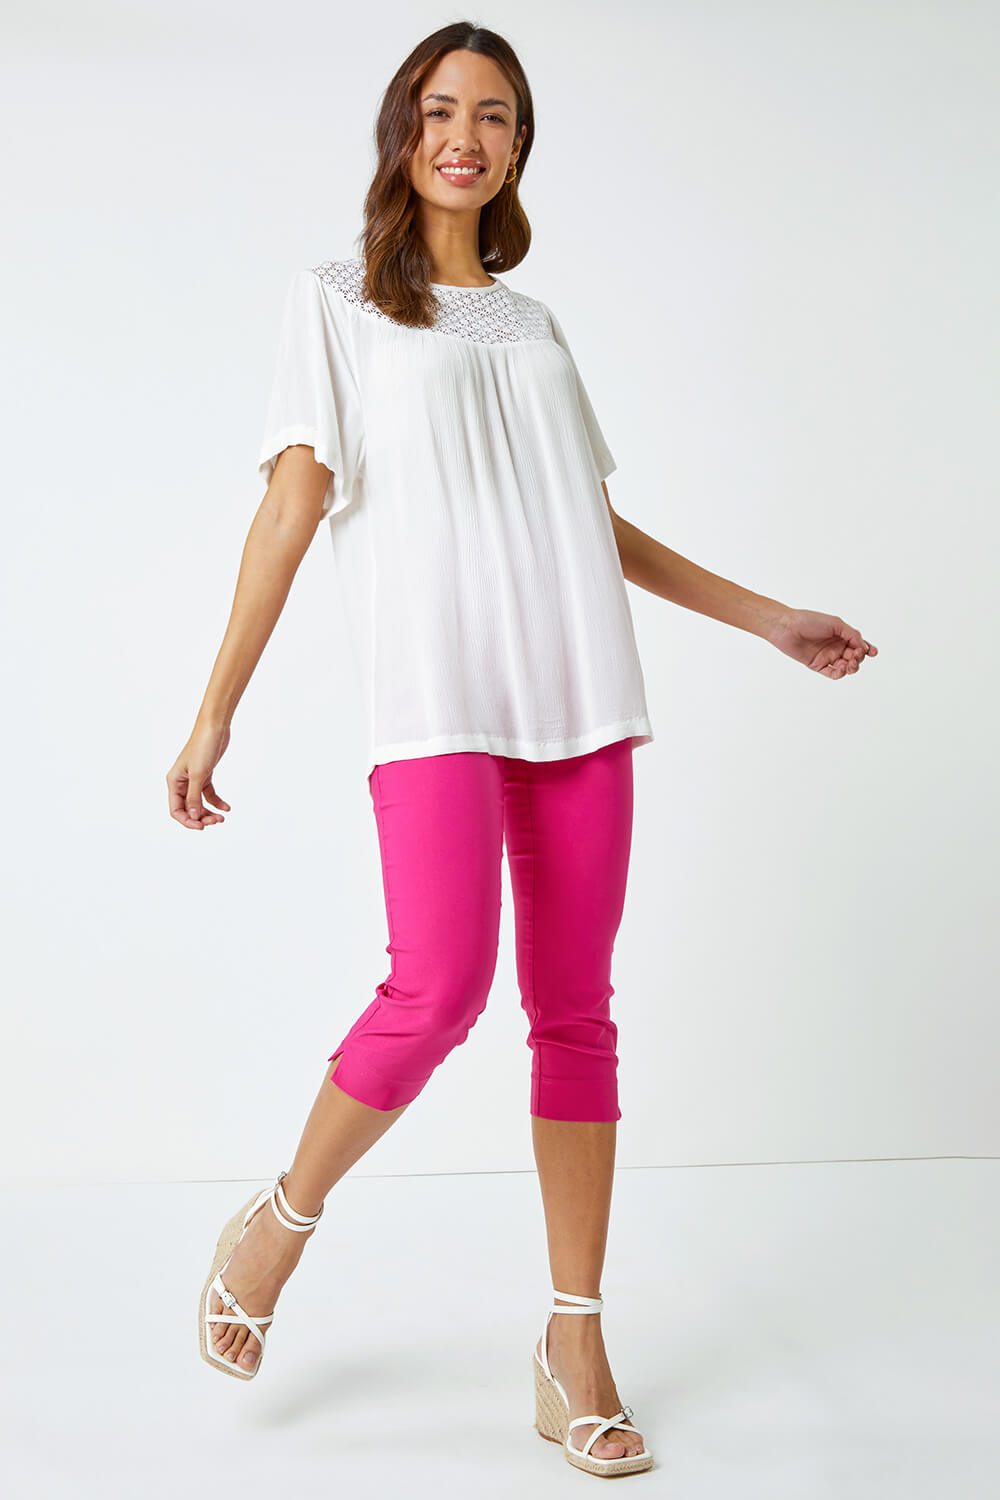 PINK Cropped Stretch Trousers, Image 2 of 5